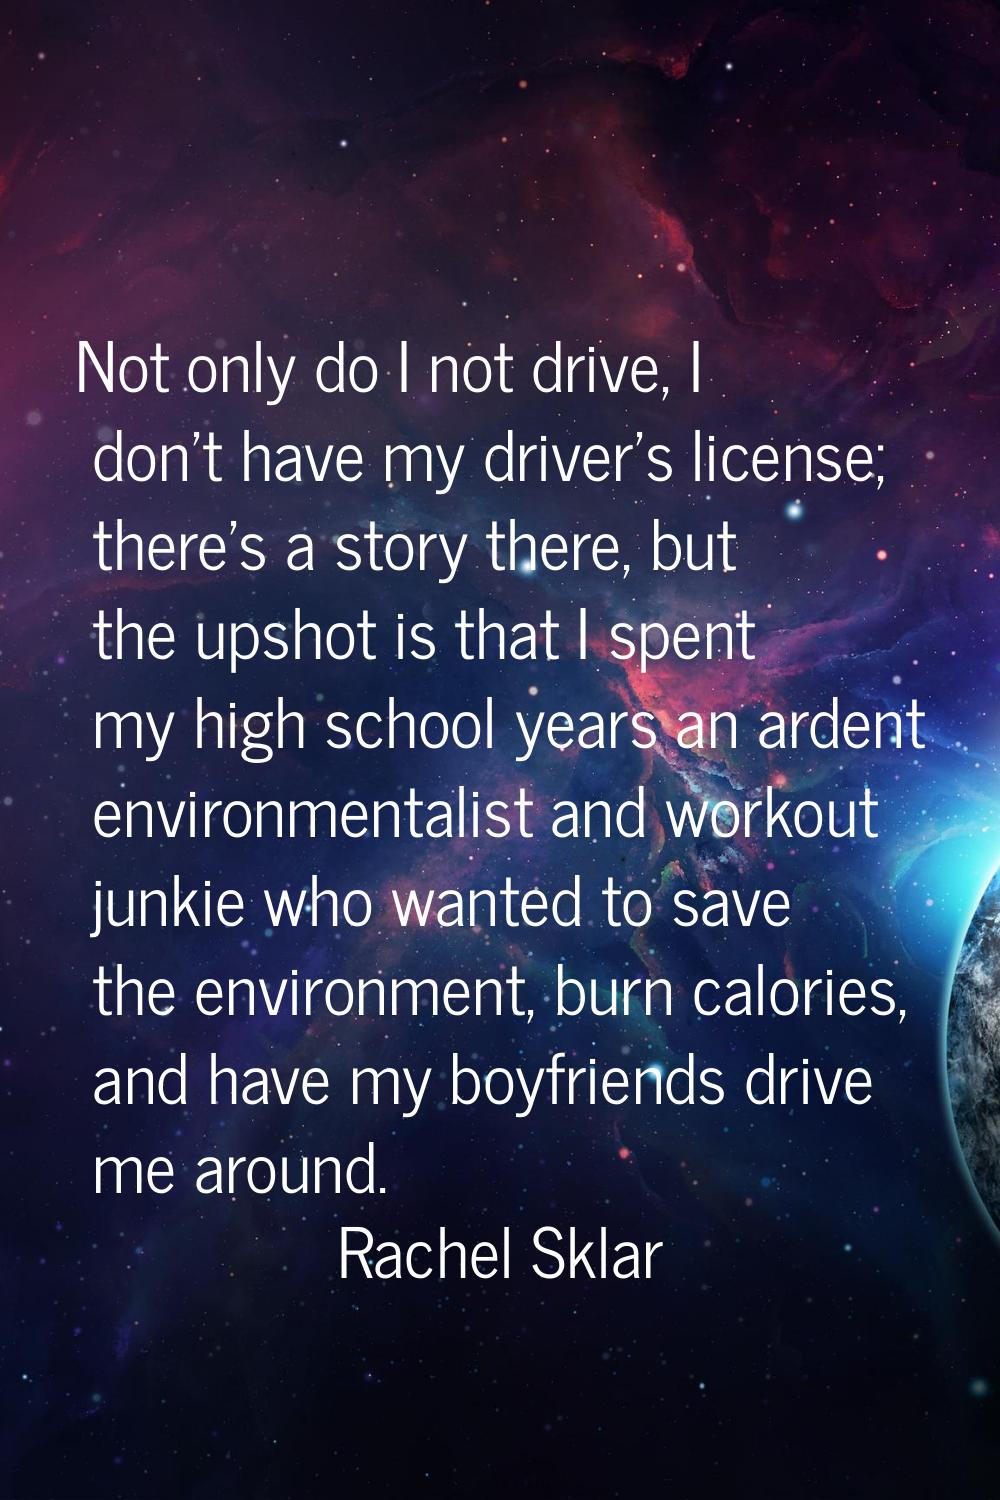 Not only do I not drive, I don't have my driver's license; there's a story there, but the upshot is